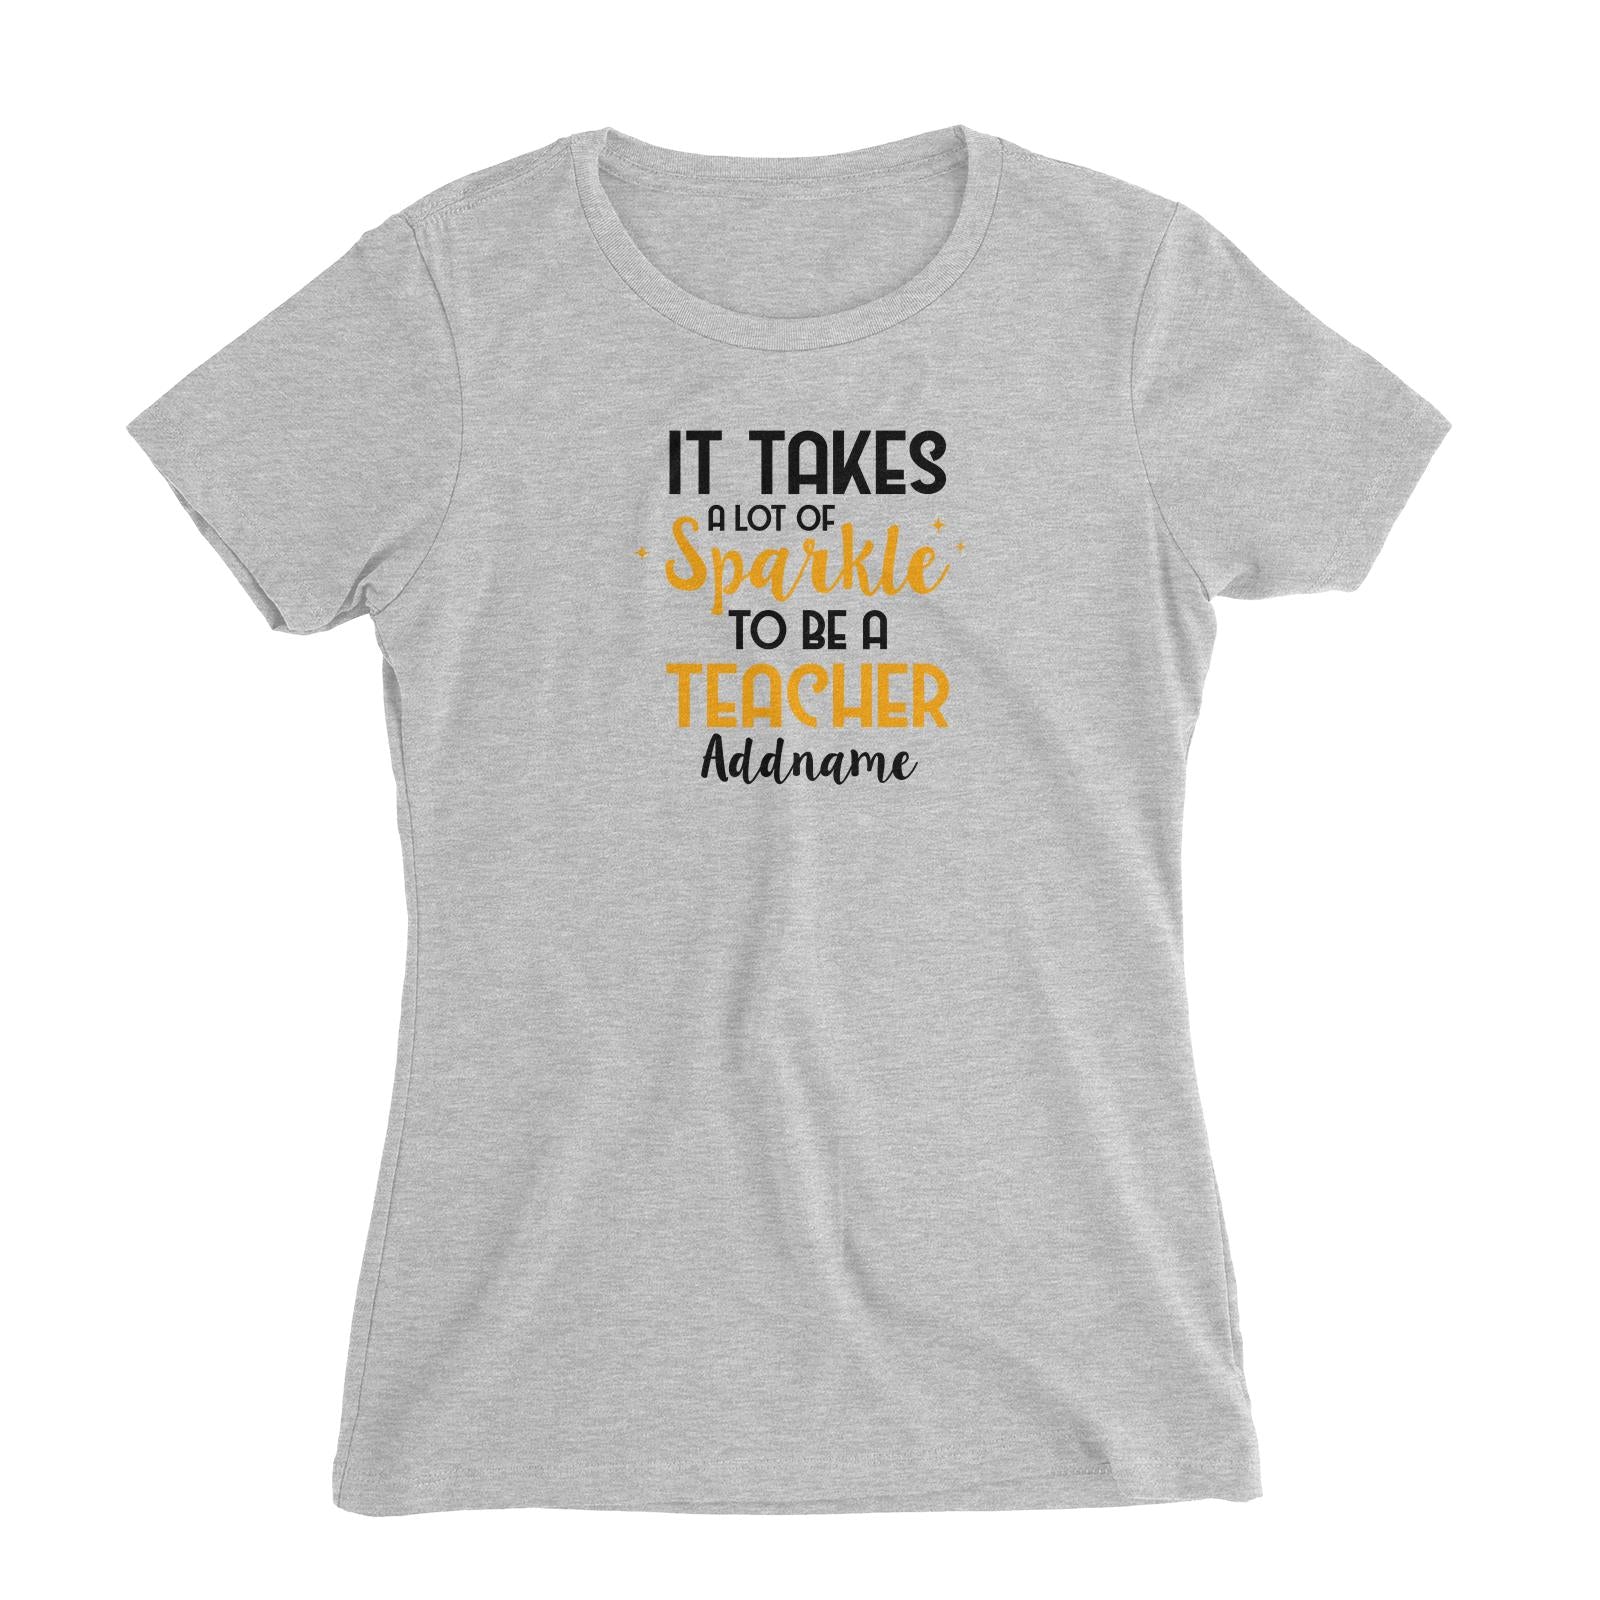 Typography Series - It Takes A Lot Of Sparkle To Be A Teacher Women's Slim Fit T-Shirt